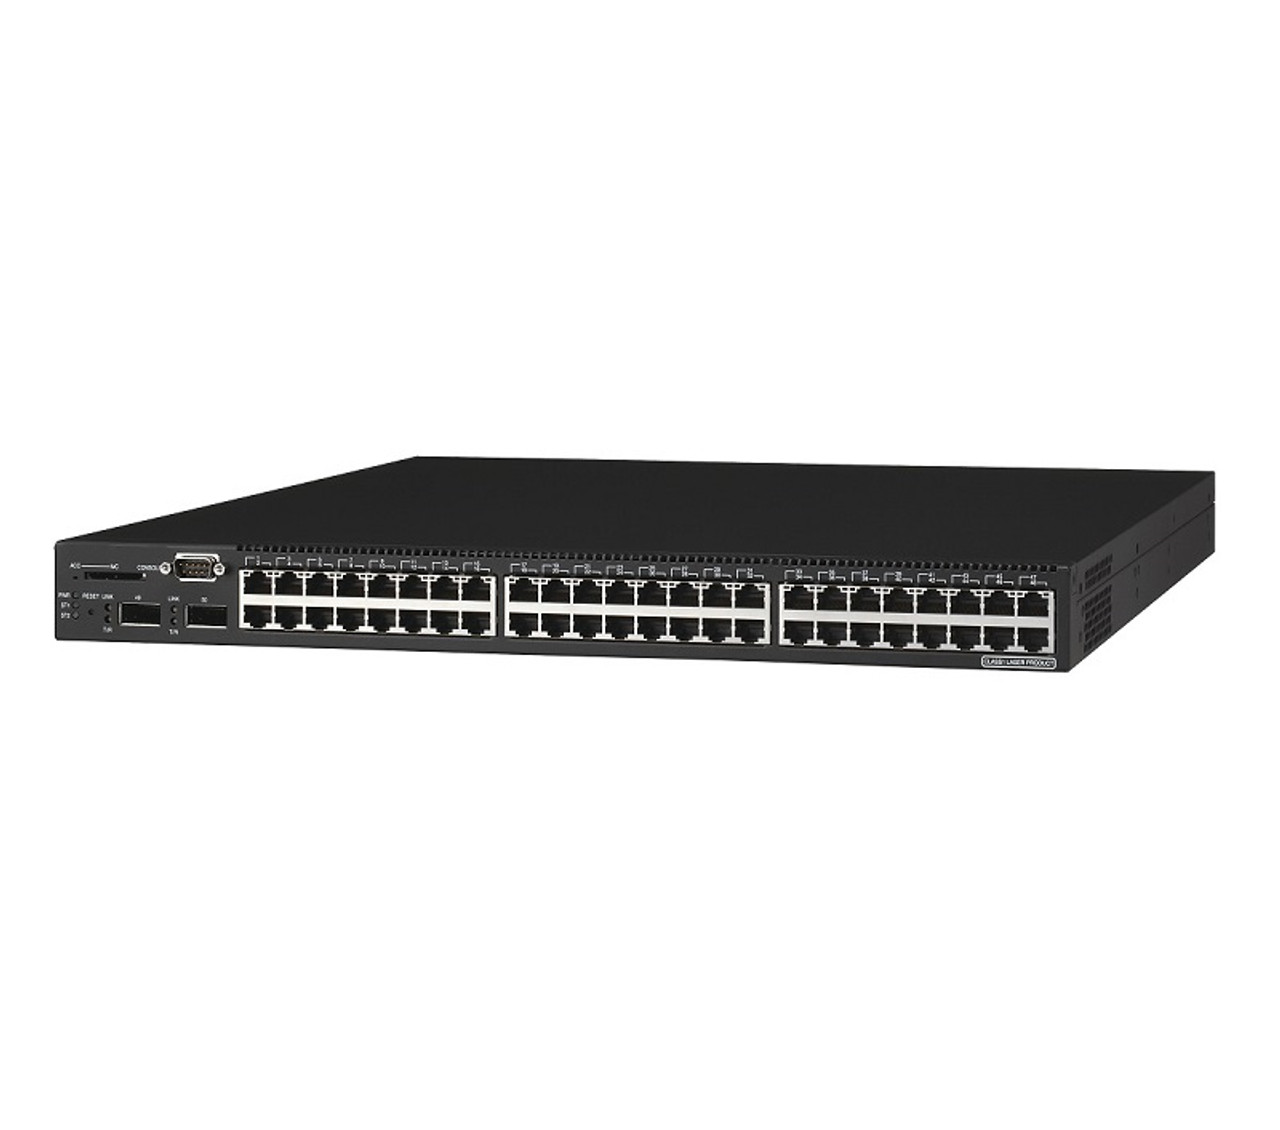 CM308 - Dell PowerConnect 3524 24-Ports 10/100 + 2 x Gigabit SFP + 2 x 10/100/1000 Managed Switch (Refurbished)